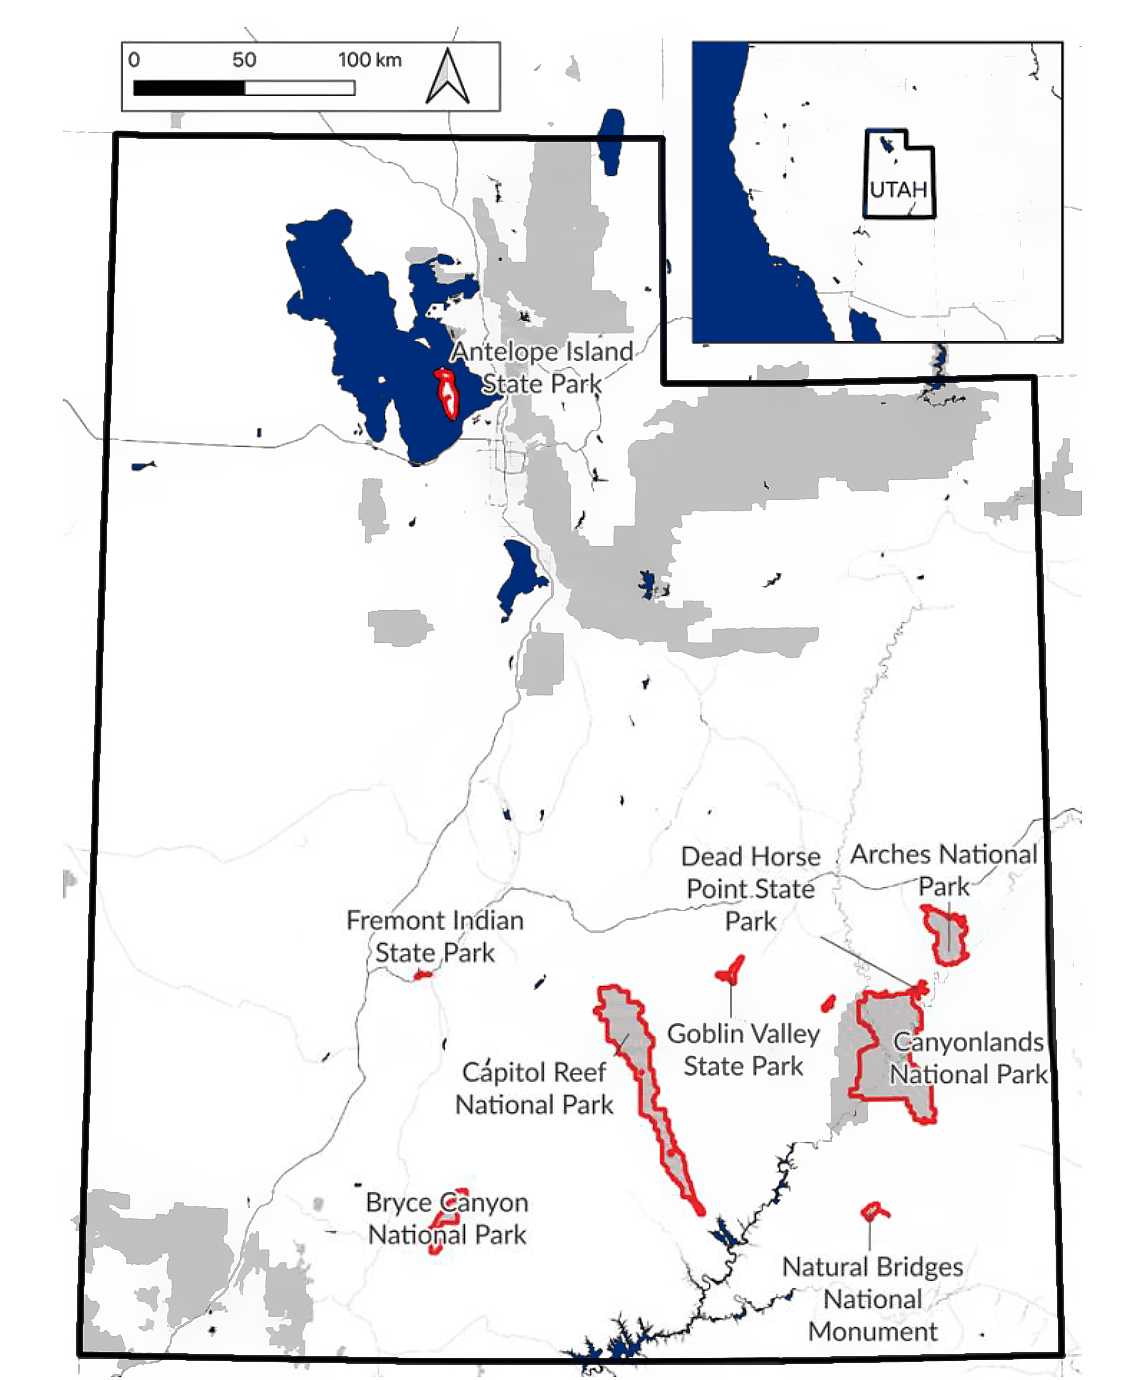 Map of Utah with nine parks outlined in red. Most are clustered in the southeast corner of the state, except for Antelope Island State Park in the north-central part. An inset shows Utah relative to the western U.S., right in the center.